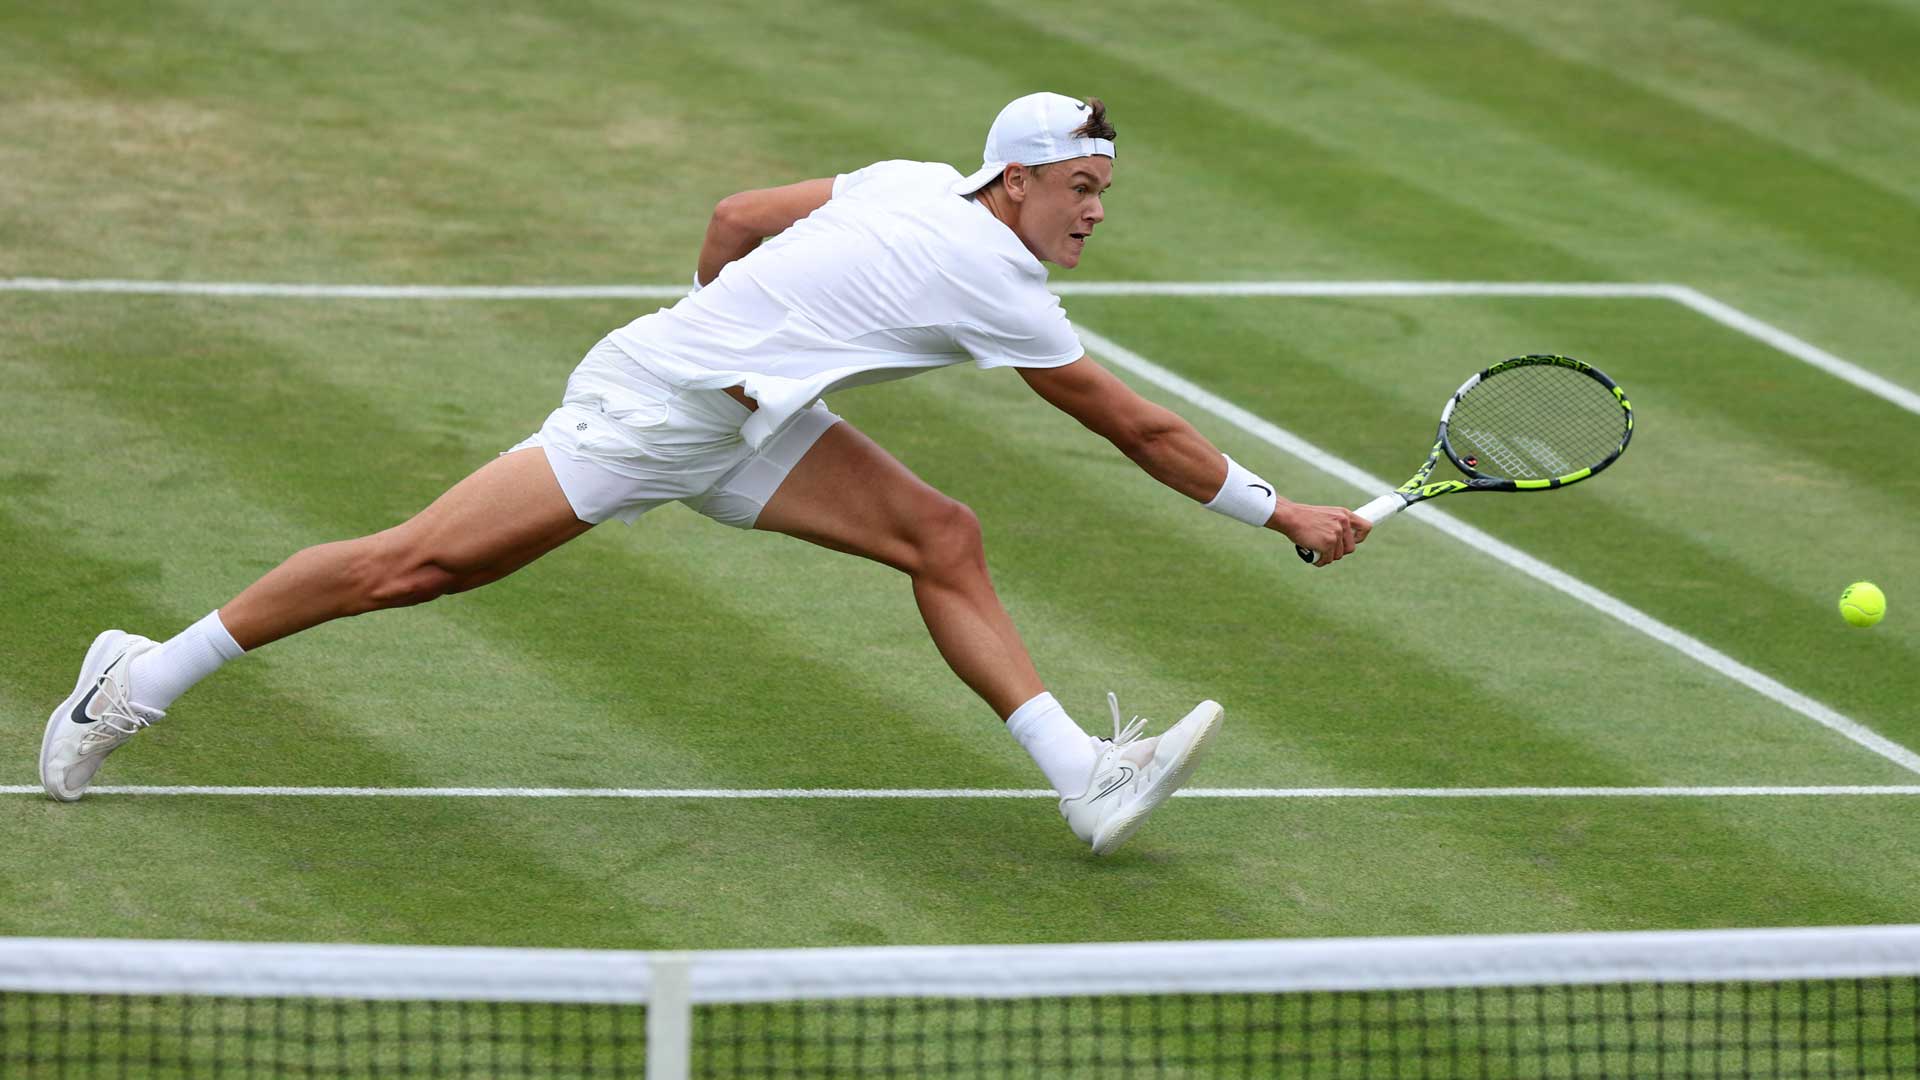 Holger Rune is playing in his second Wimbledon and eighth Grand Slam overall. 